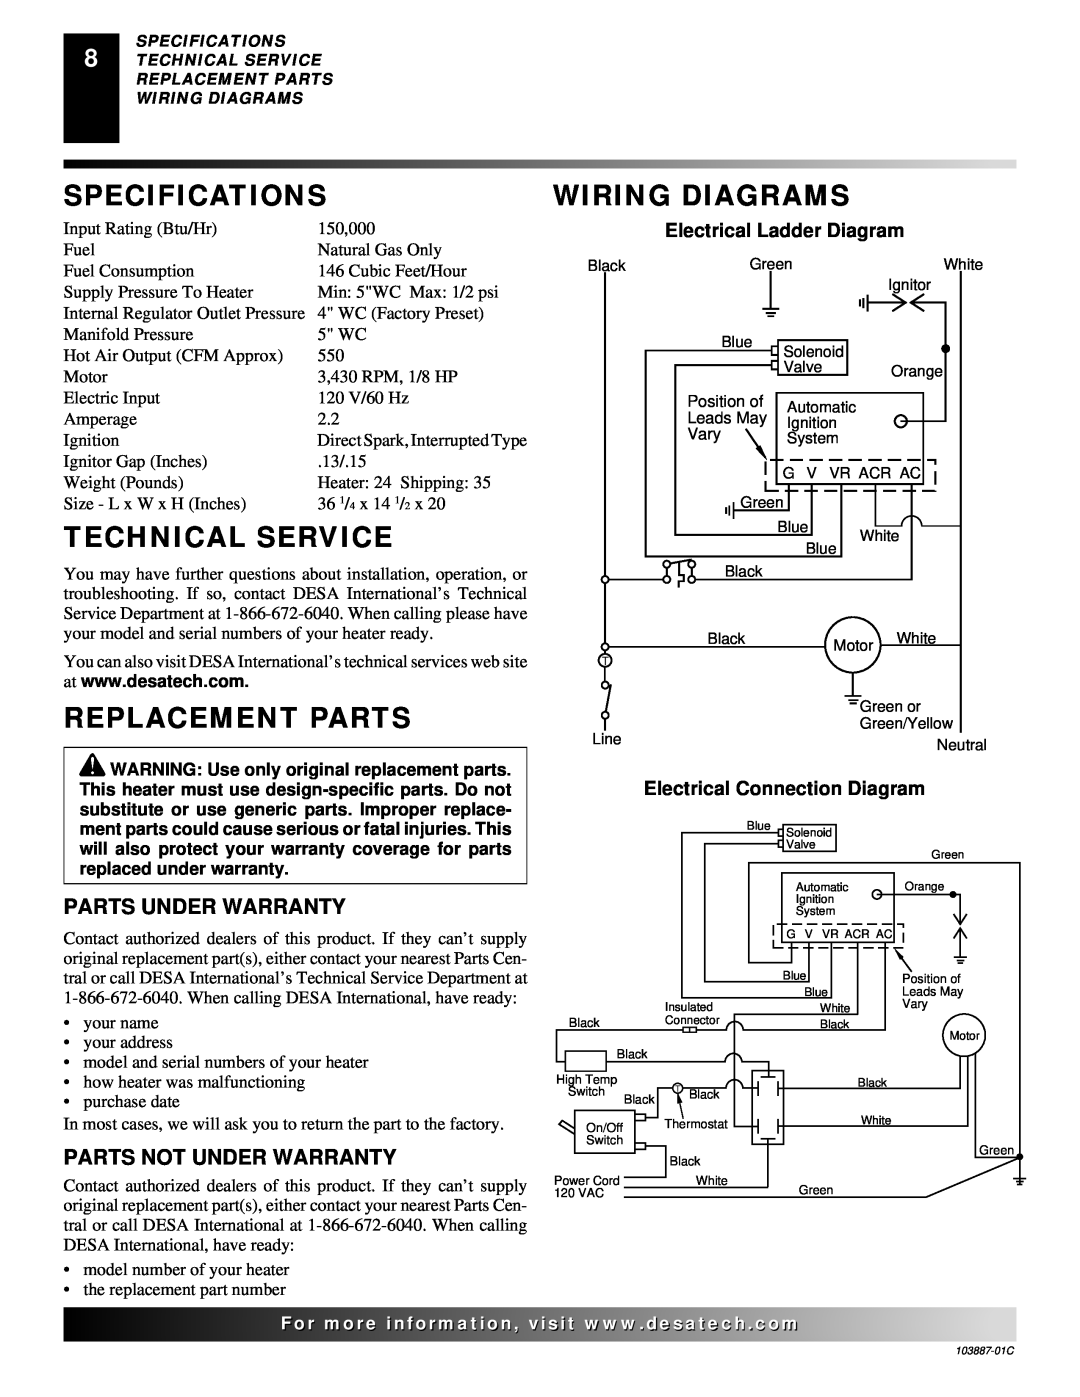 Desa BNG150T owner manual Specifications, Technical Service, Wiring Diagrams, Replacement Parts, Electrical Ladder Diagram 